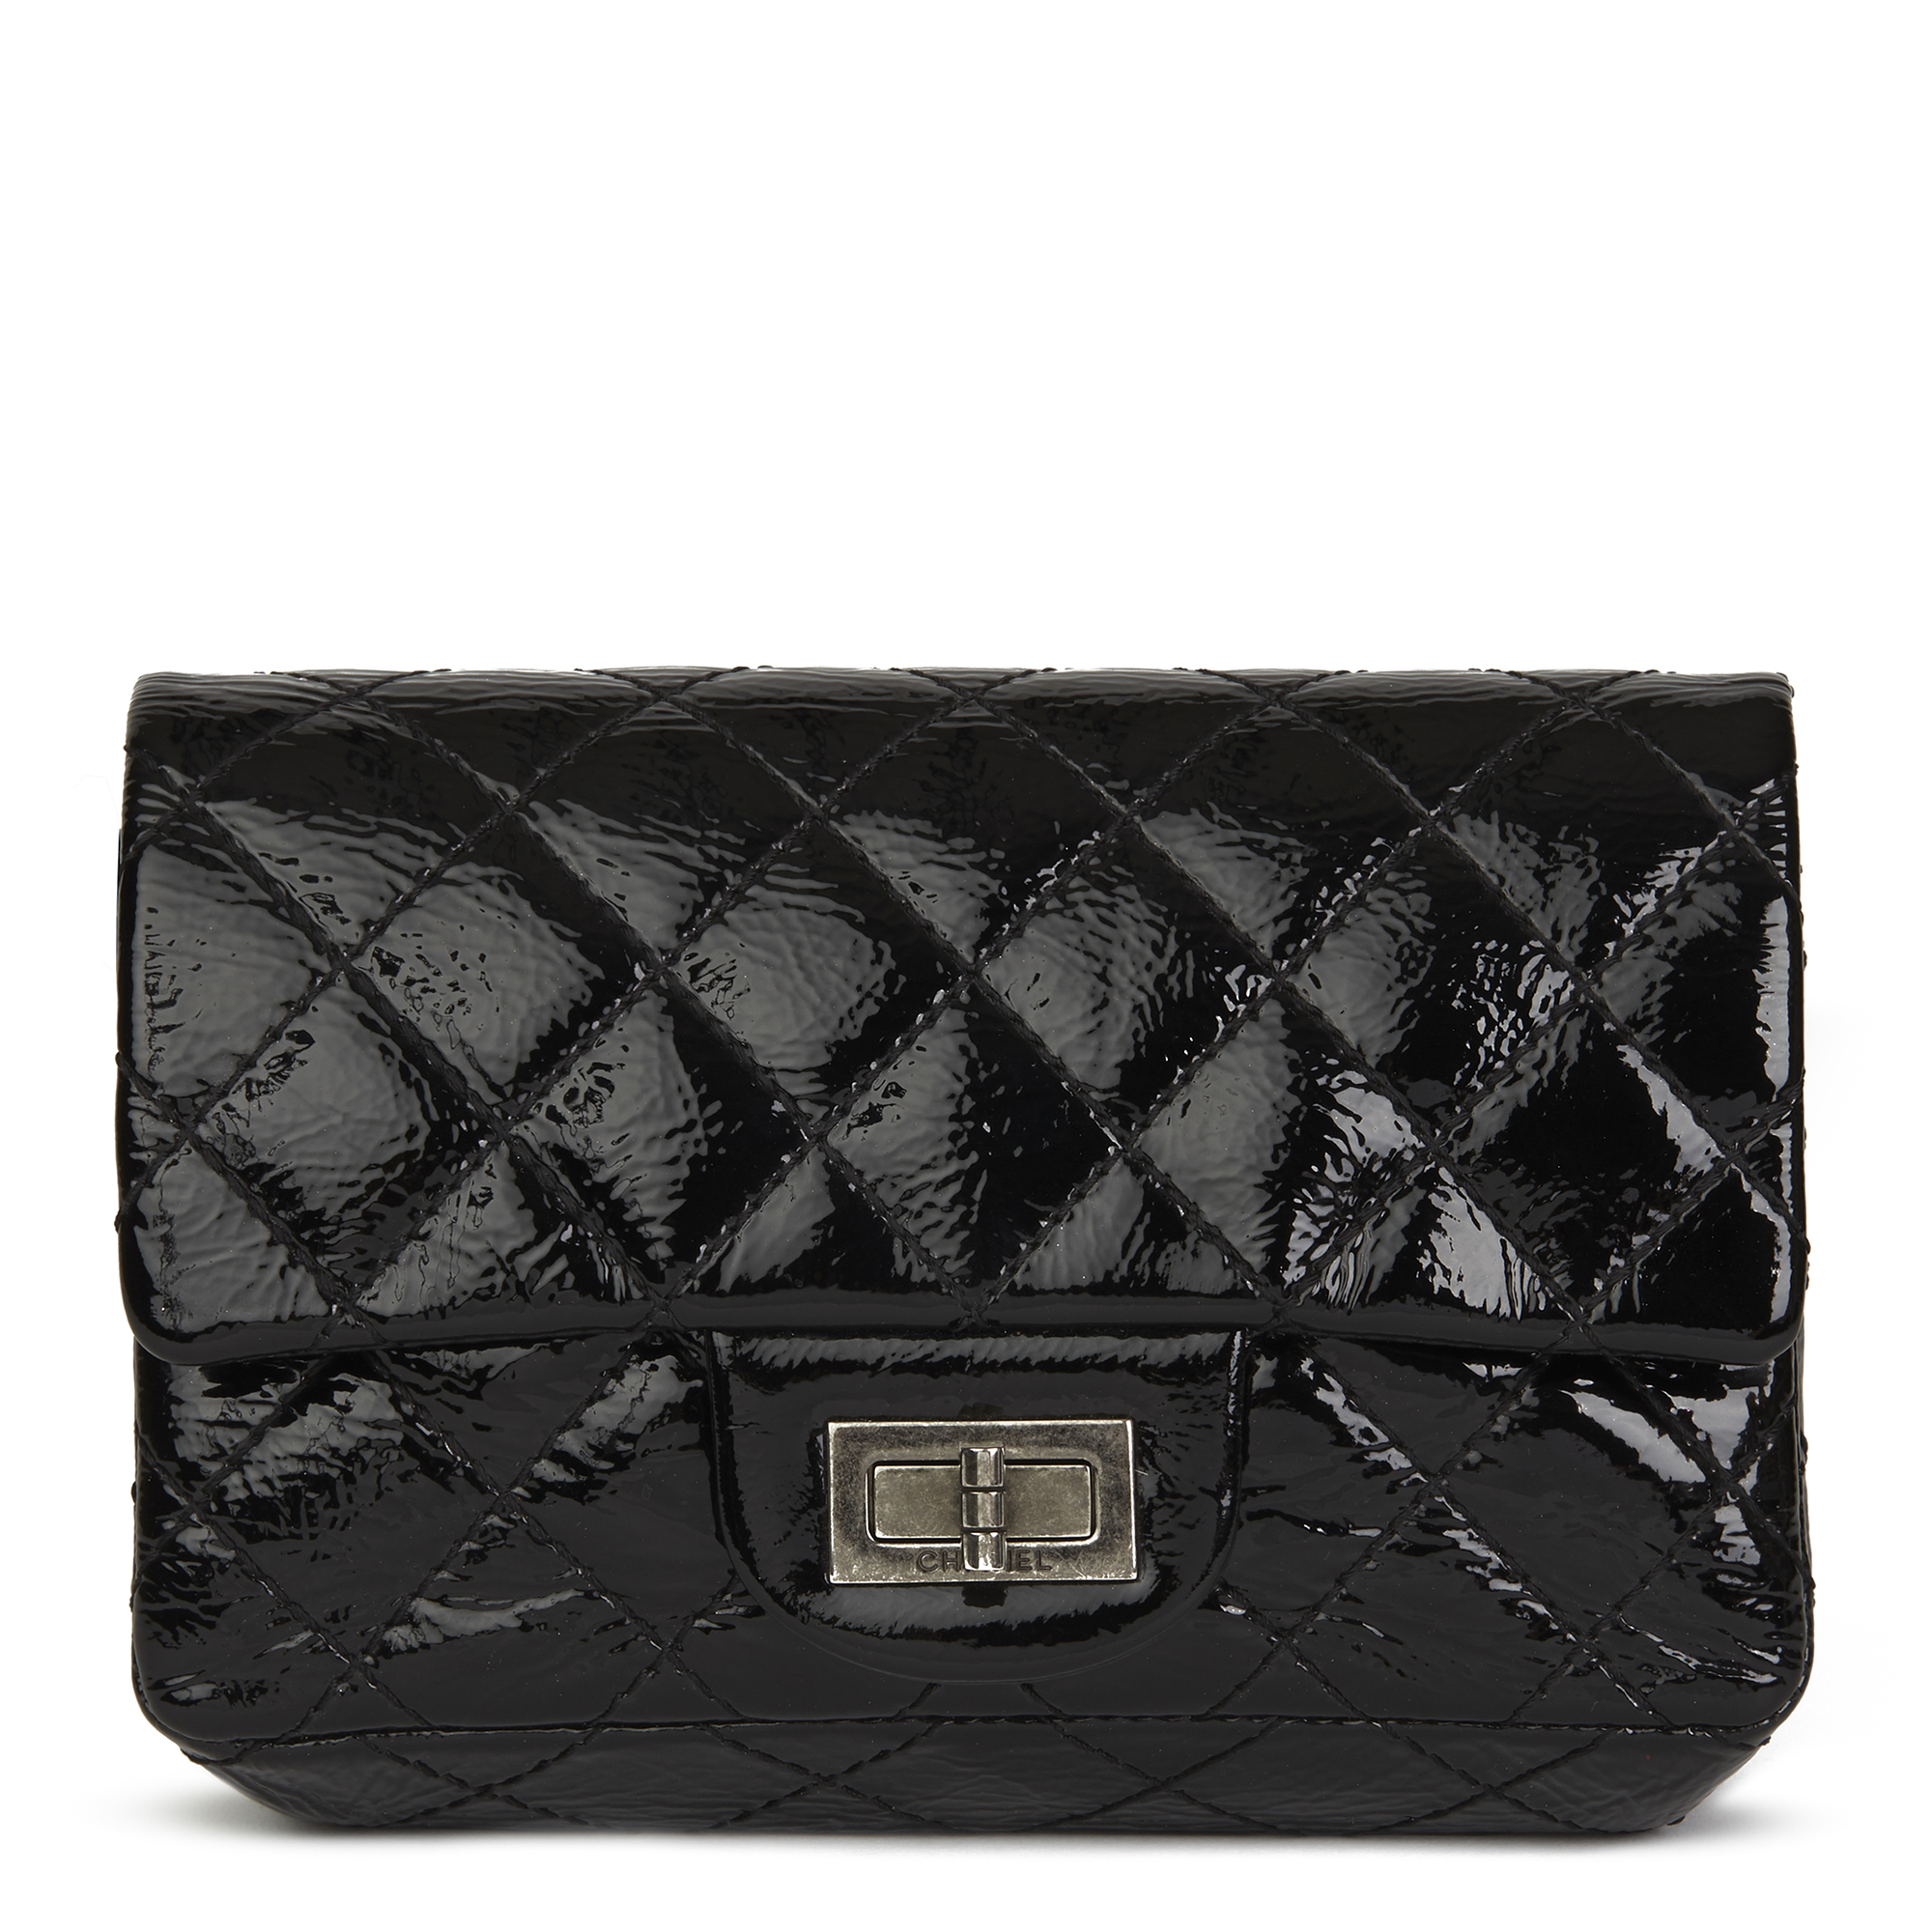 CHANEL BLACK QUILTED AGED PATENT LEATHER 2.55 REISSUE CLUTCH HB2469 | eBay